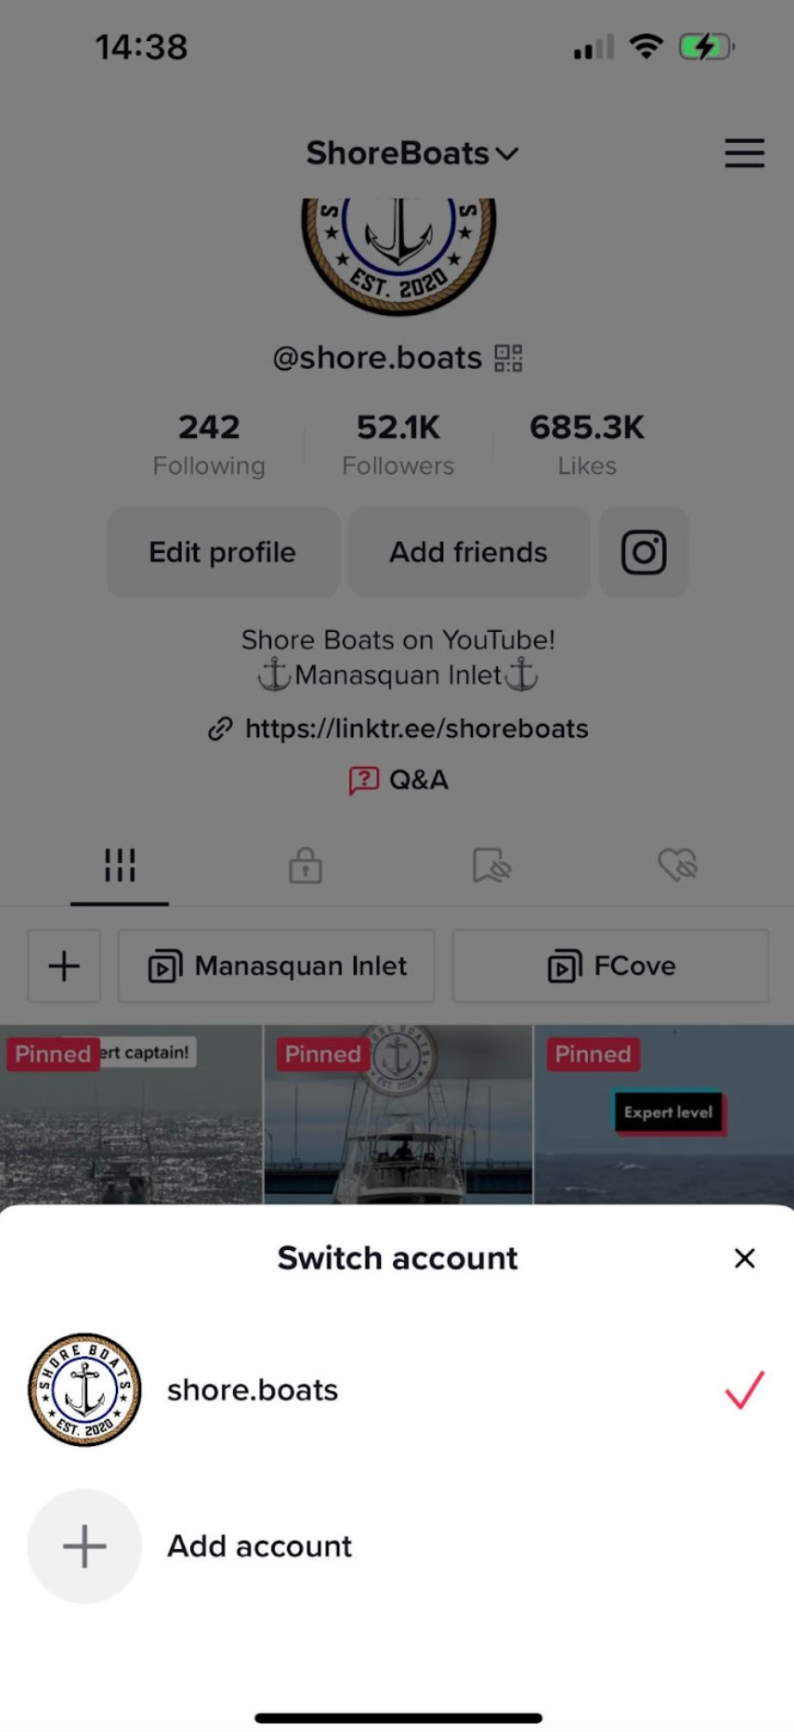 How to Use TikTok to Sell your Products on ?